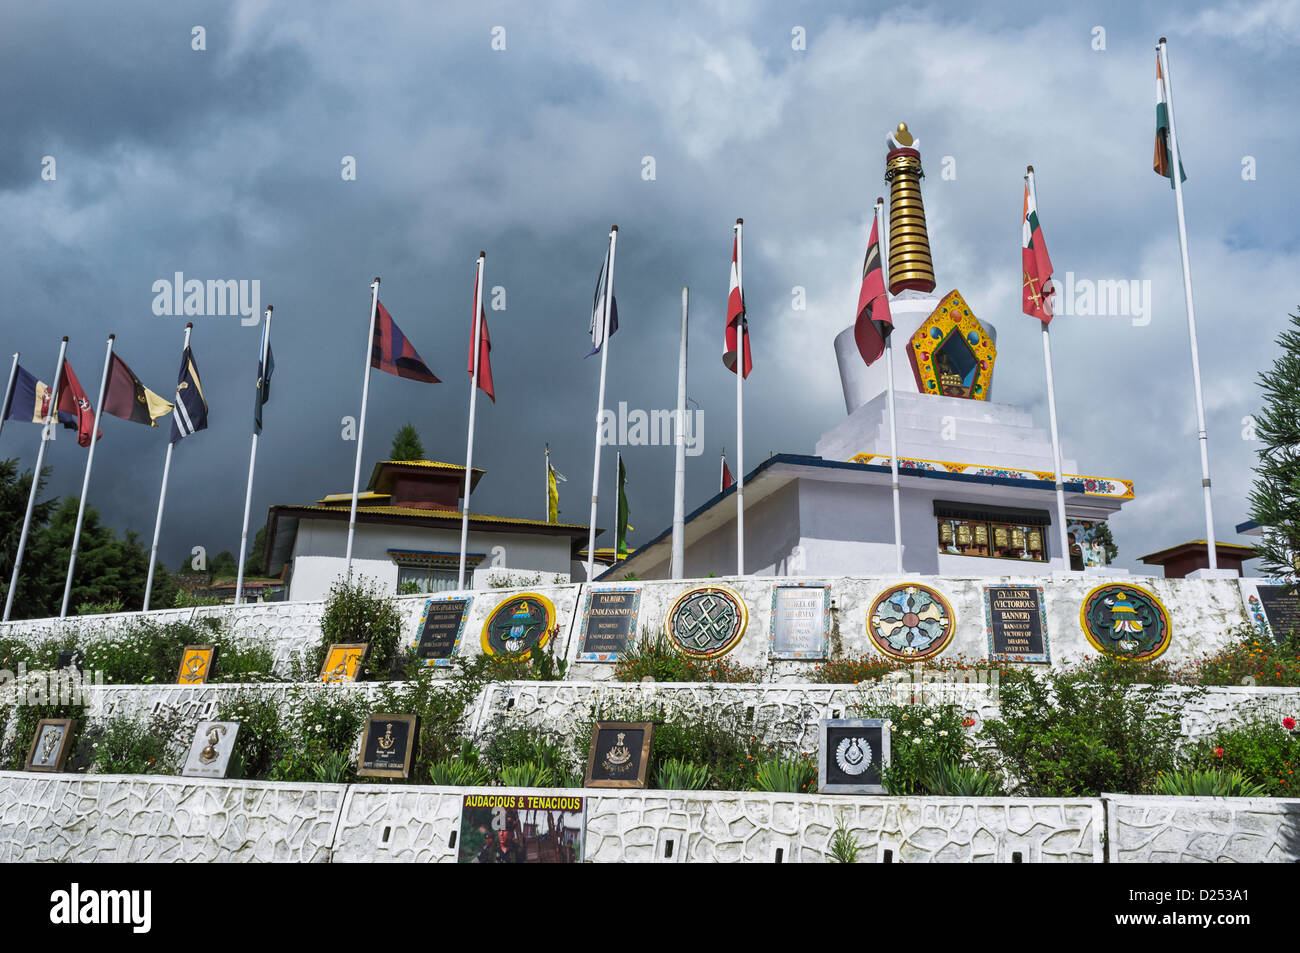 The memorial site in Tawang, Arunachal Pradesh, India in memory of the Indian soldiers killed in the Indo-China war of 1962. Stock Photo